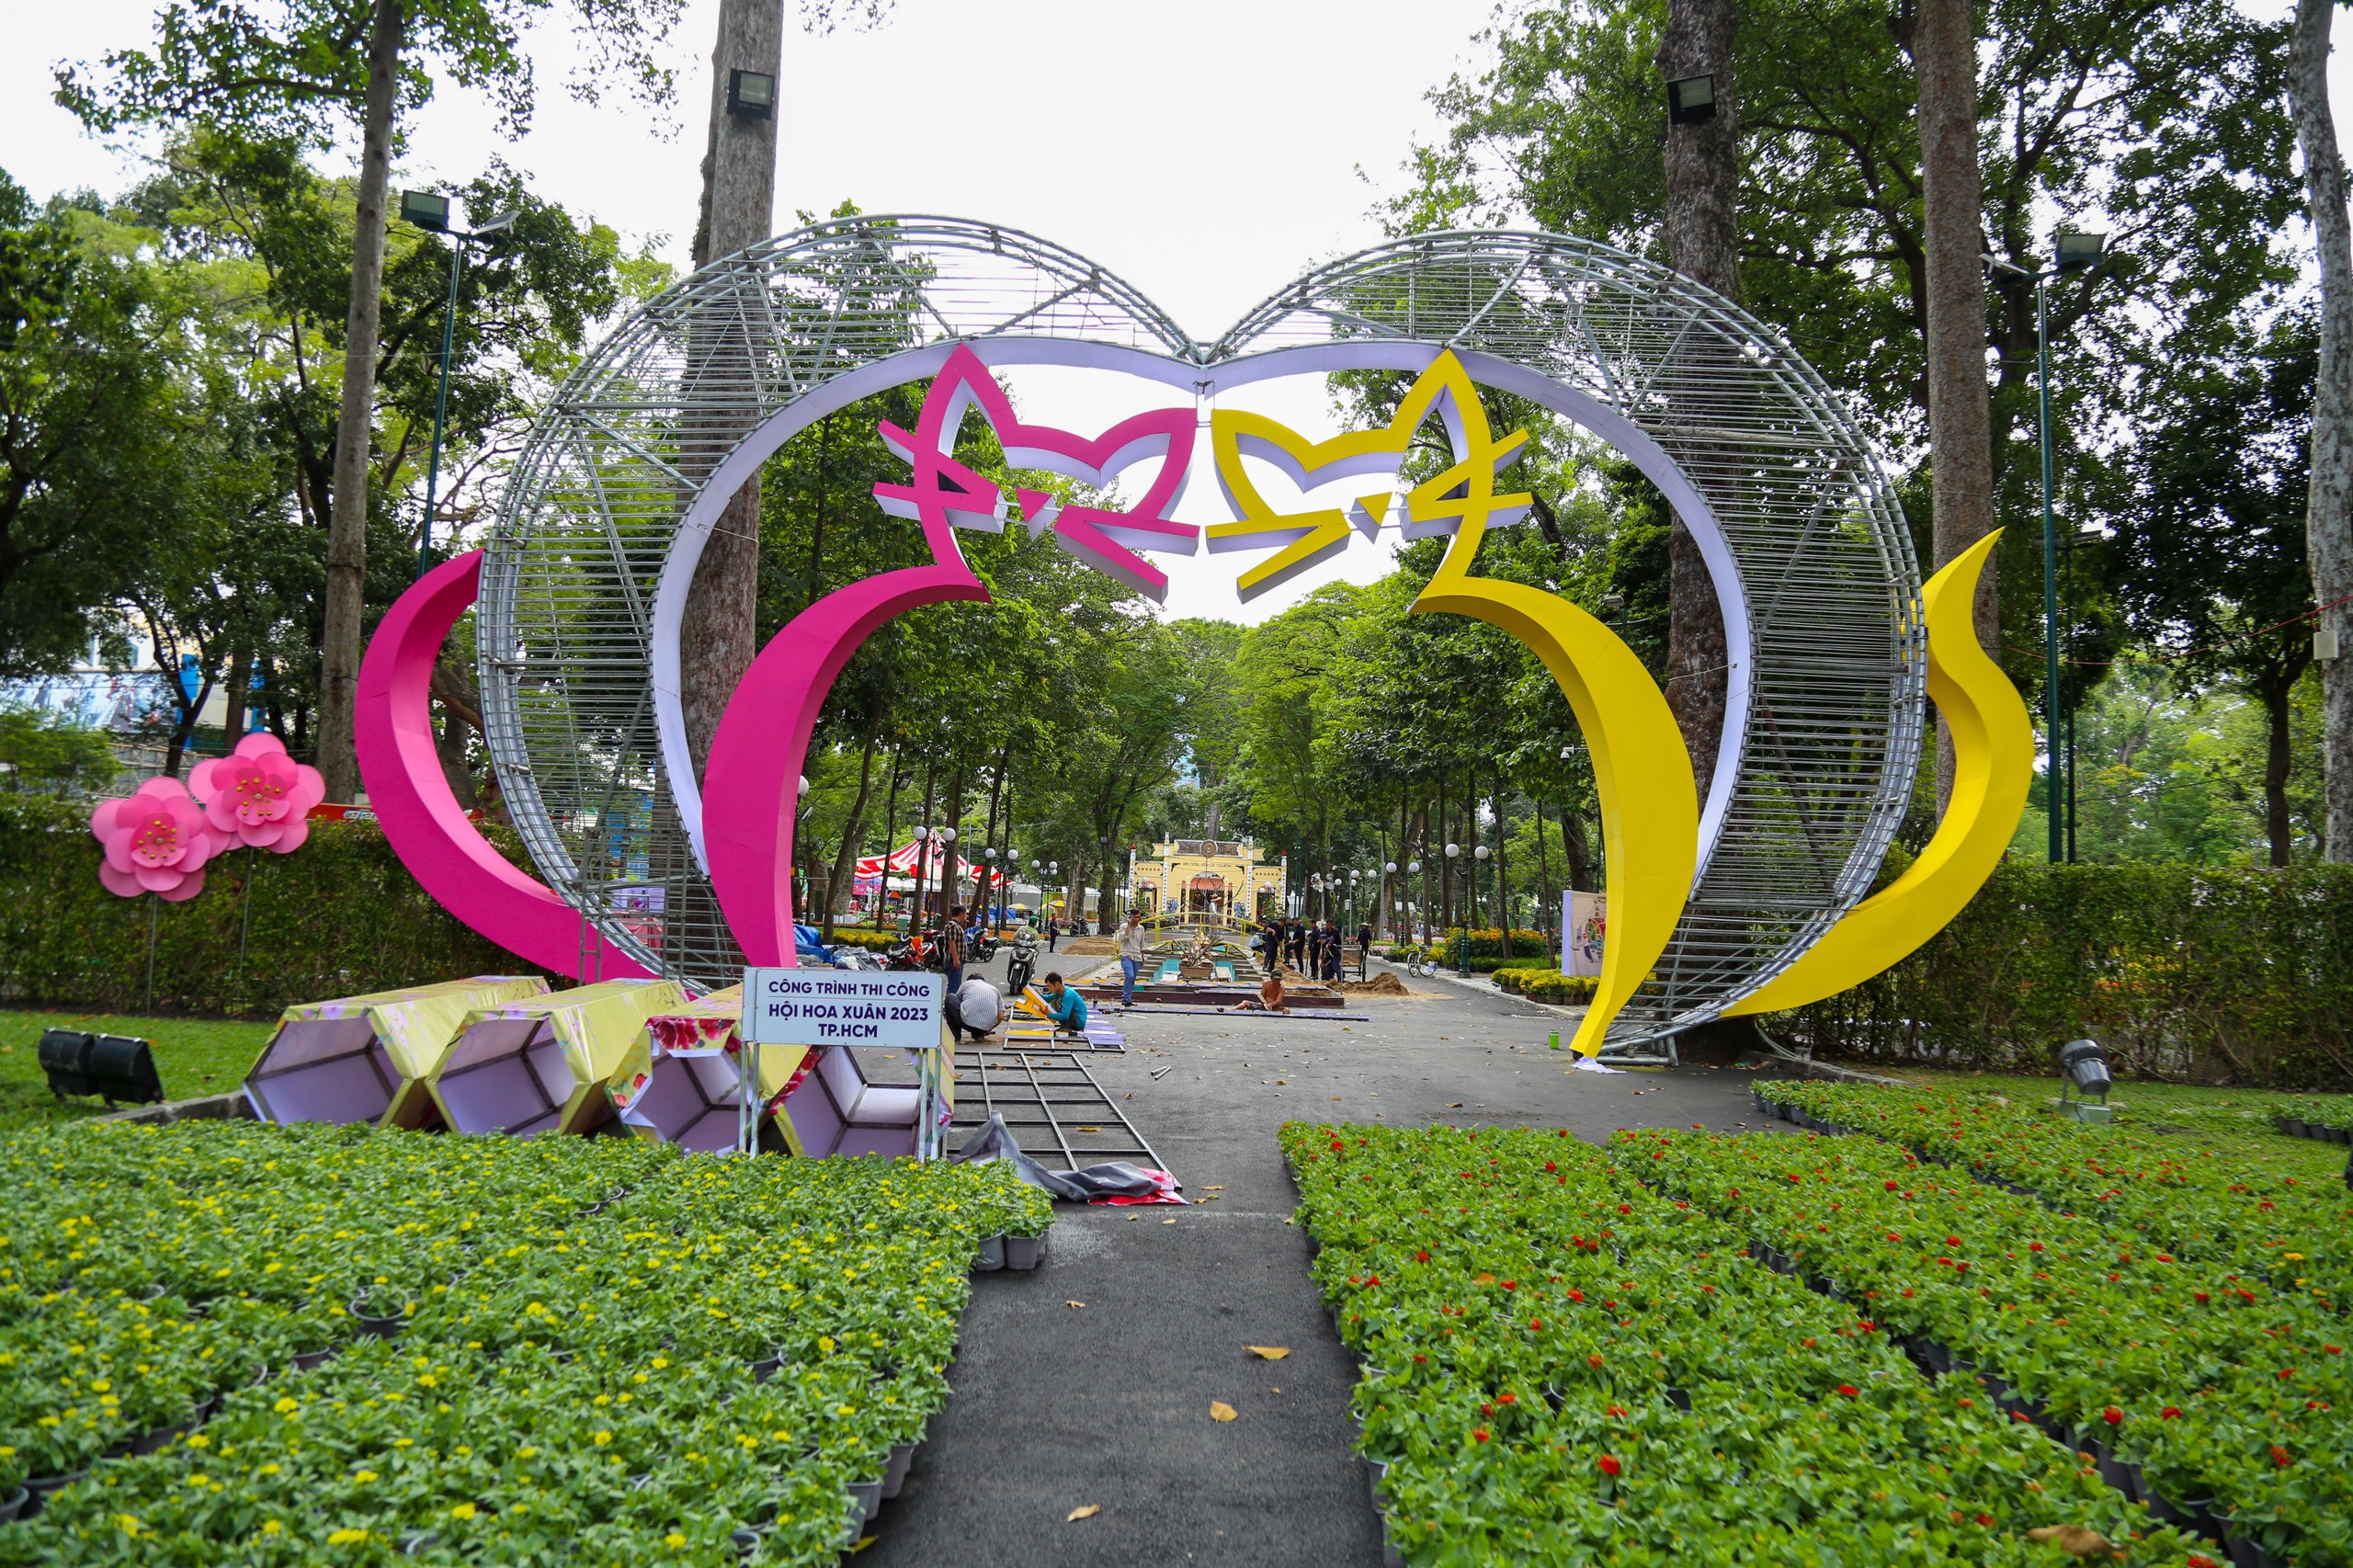 Preparations for Ho Chi Minh City’s annual spring flower festival near completion